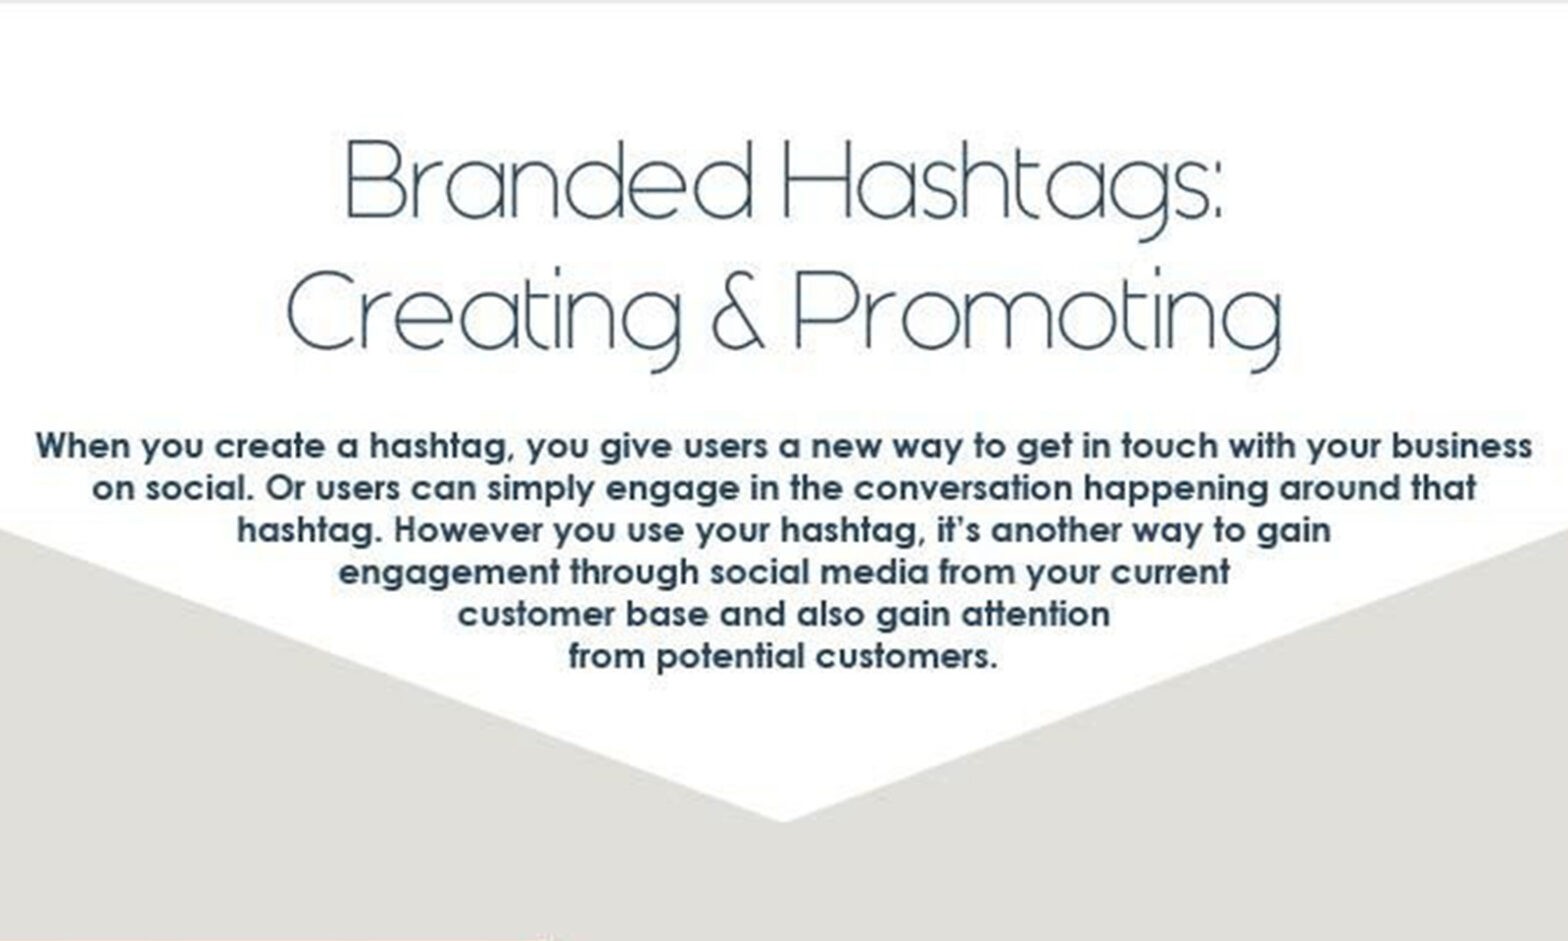 Featured image for post: Branded Hashtags: Creating and Promoting